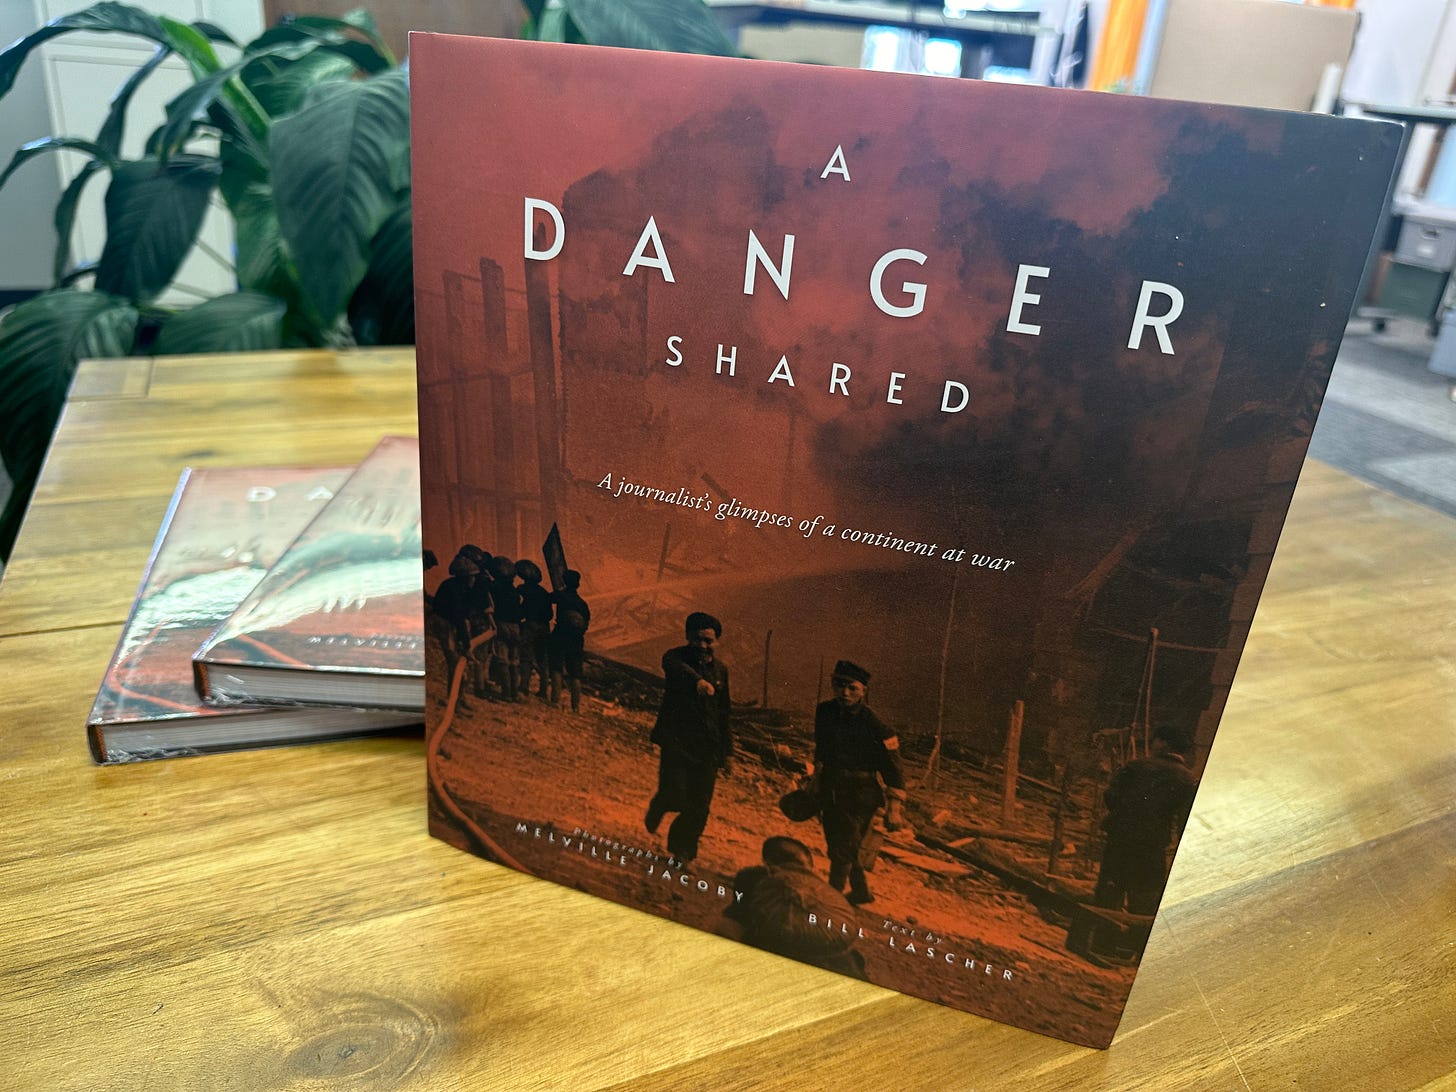 A copy of the book A Danger Shared with photographs by Melville Jacoby and text by Bill Lascher stands on a wooden table with two more shrink-wrapped copies of the book resting on the table behind it.